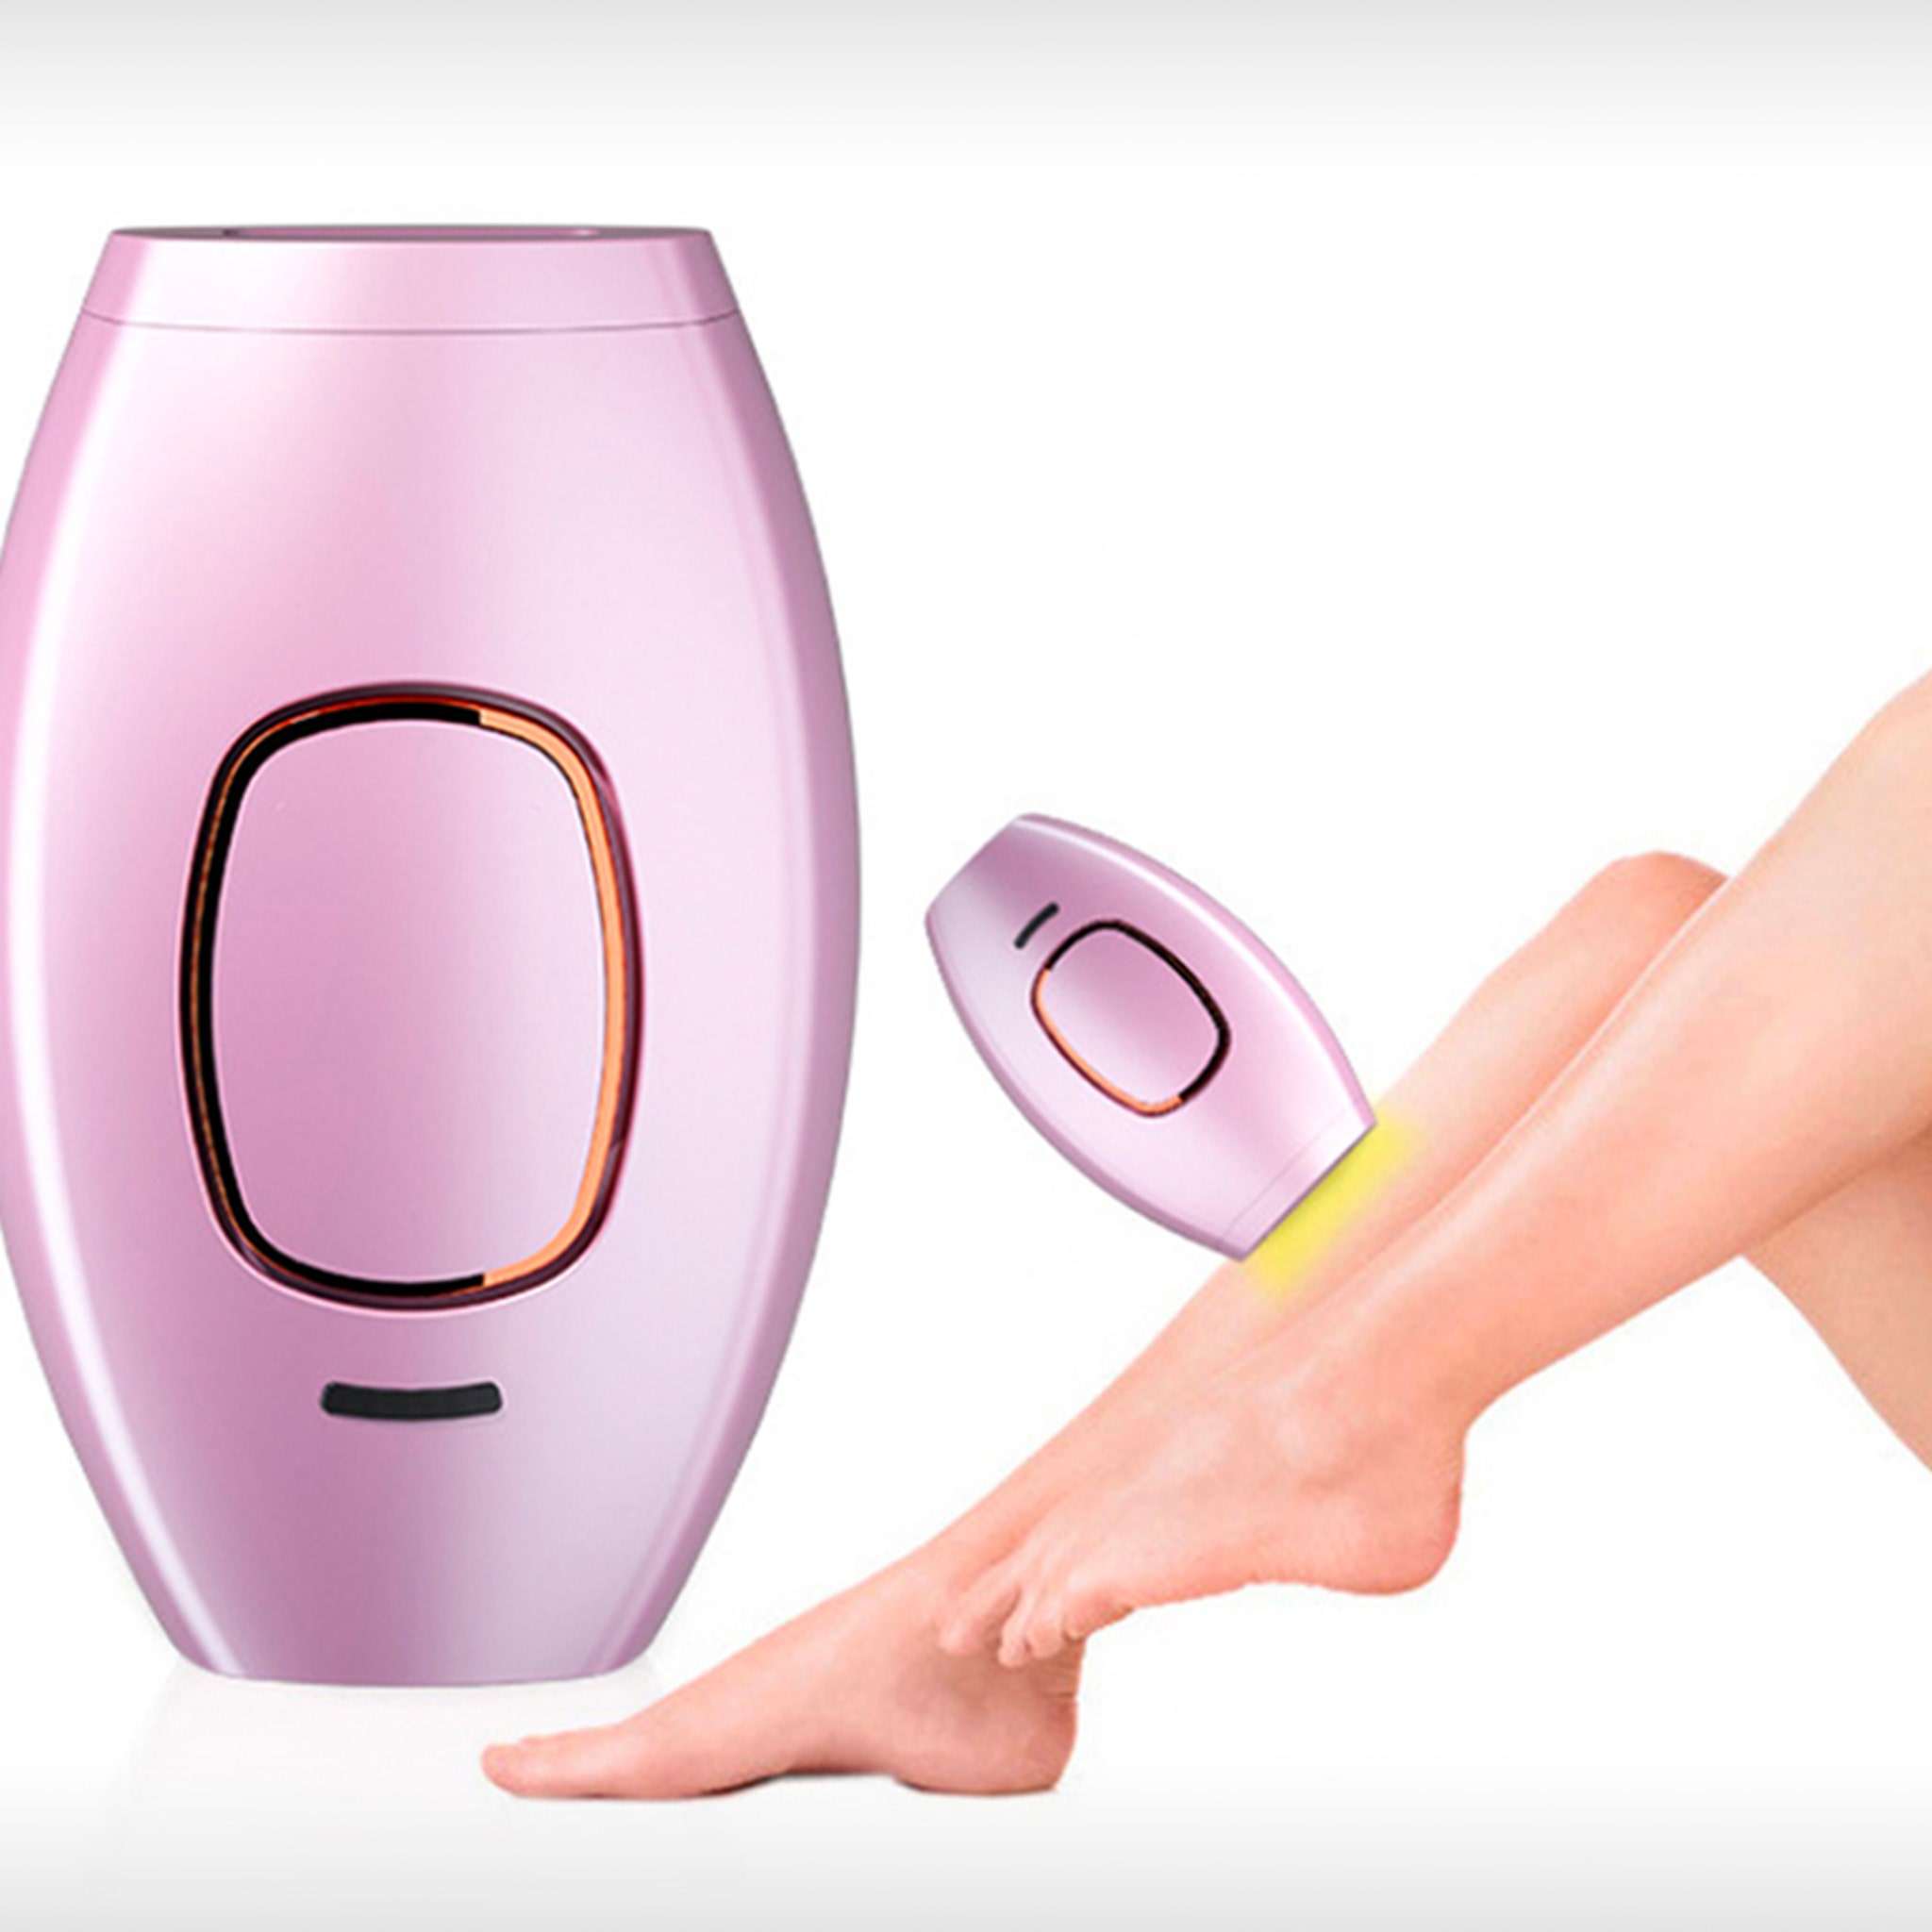 Remove Unwanted Body Hair with This Laser Hair Removal Device